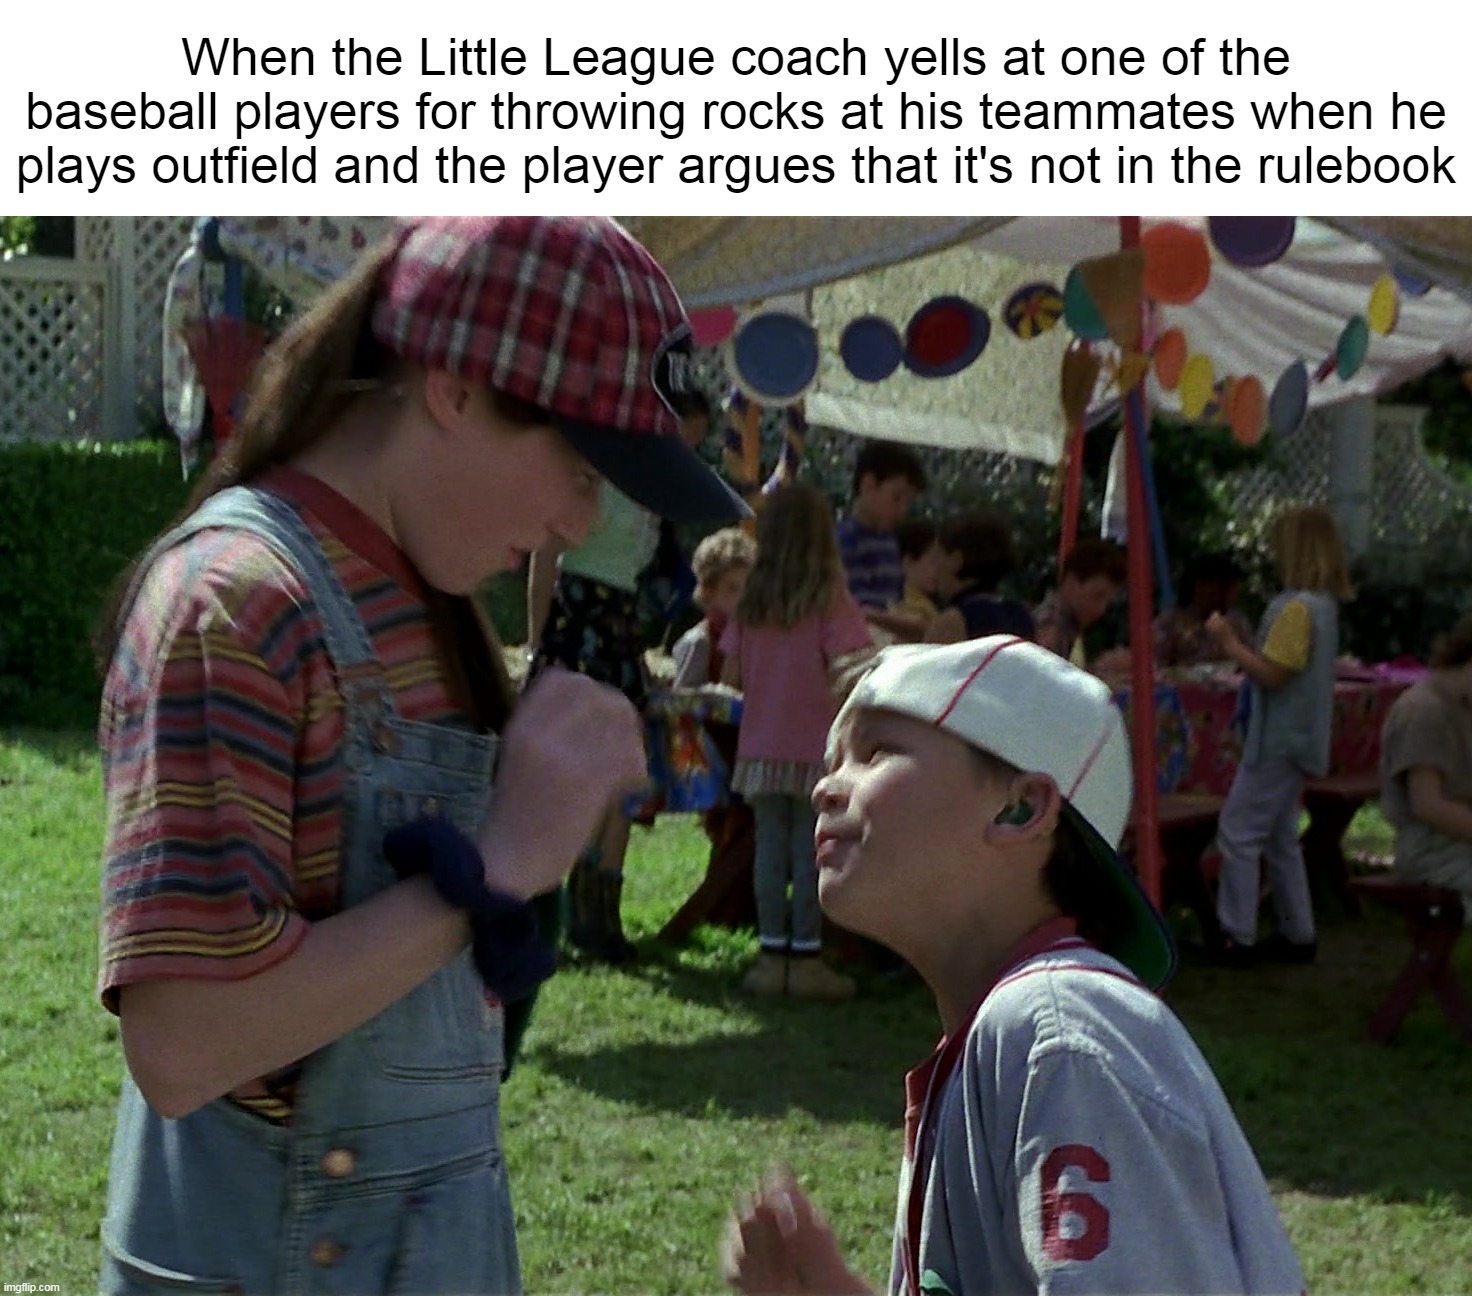 When the Little League coach yells at one of the baseball players for throwing rocks at his teammates when he plays outfield and the player argues that it's not in the rulebook | image tagged in meme,memes,funny,kids,baseball | made w/ Imgflip meme maker